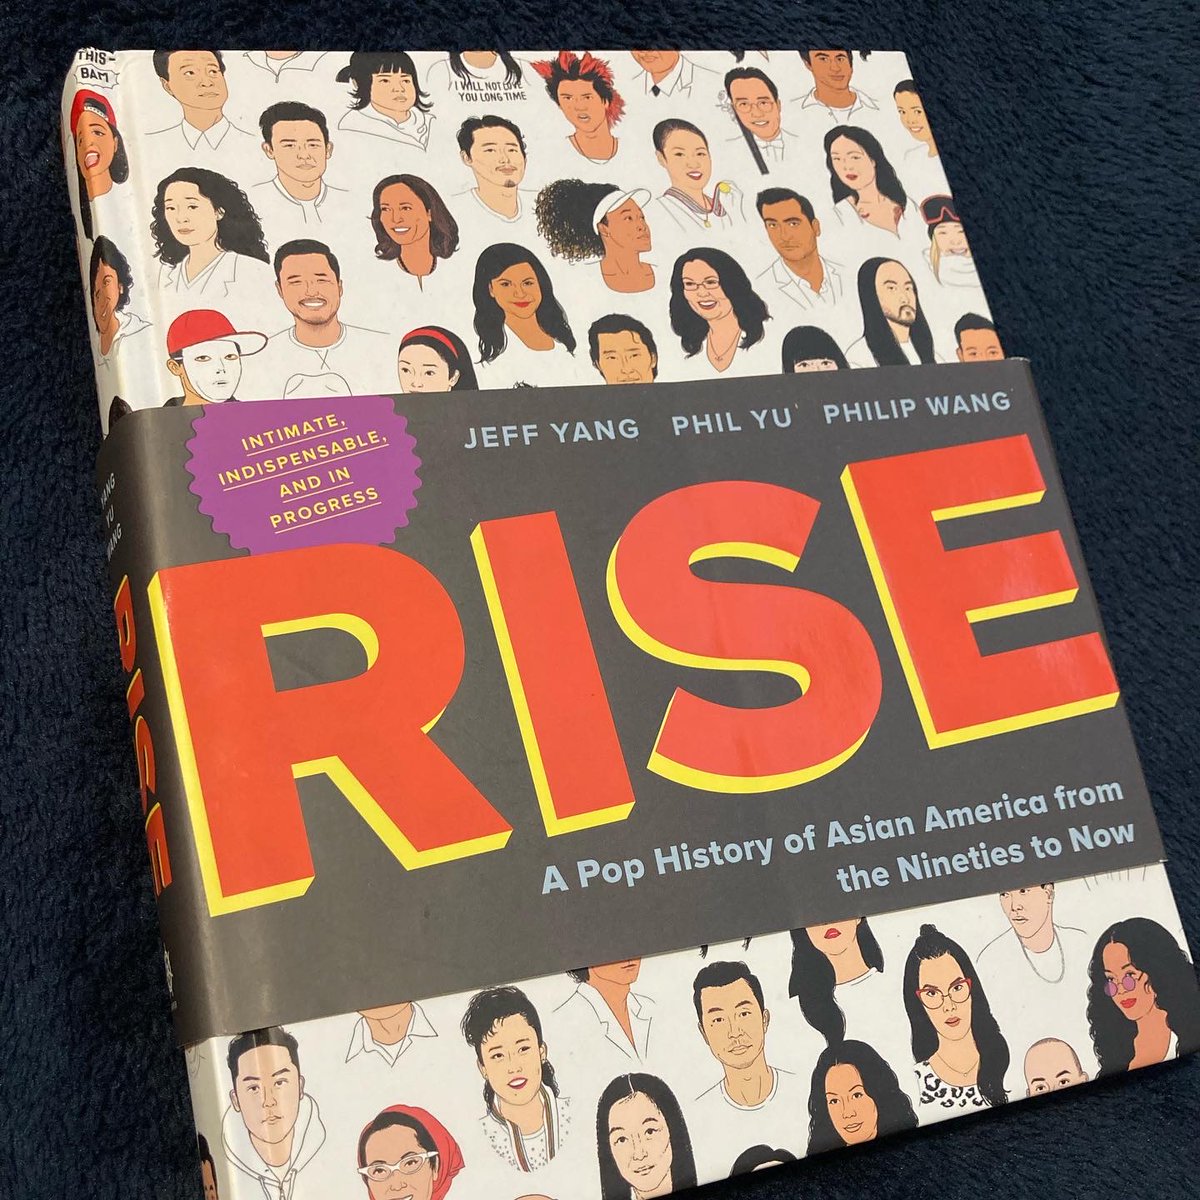 Today is the one-year publication anniversary of our book RISE: A Pop History of Asian America From the Nineties to Now. Thank you to everyone who’s supported the book, tabbed it up, spread the word, and put it in the hands of friends. harpercollins.com/pages/Rise